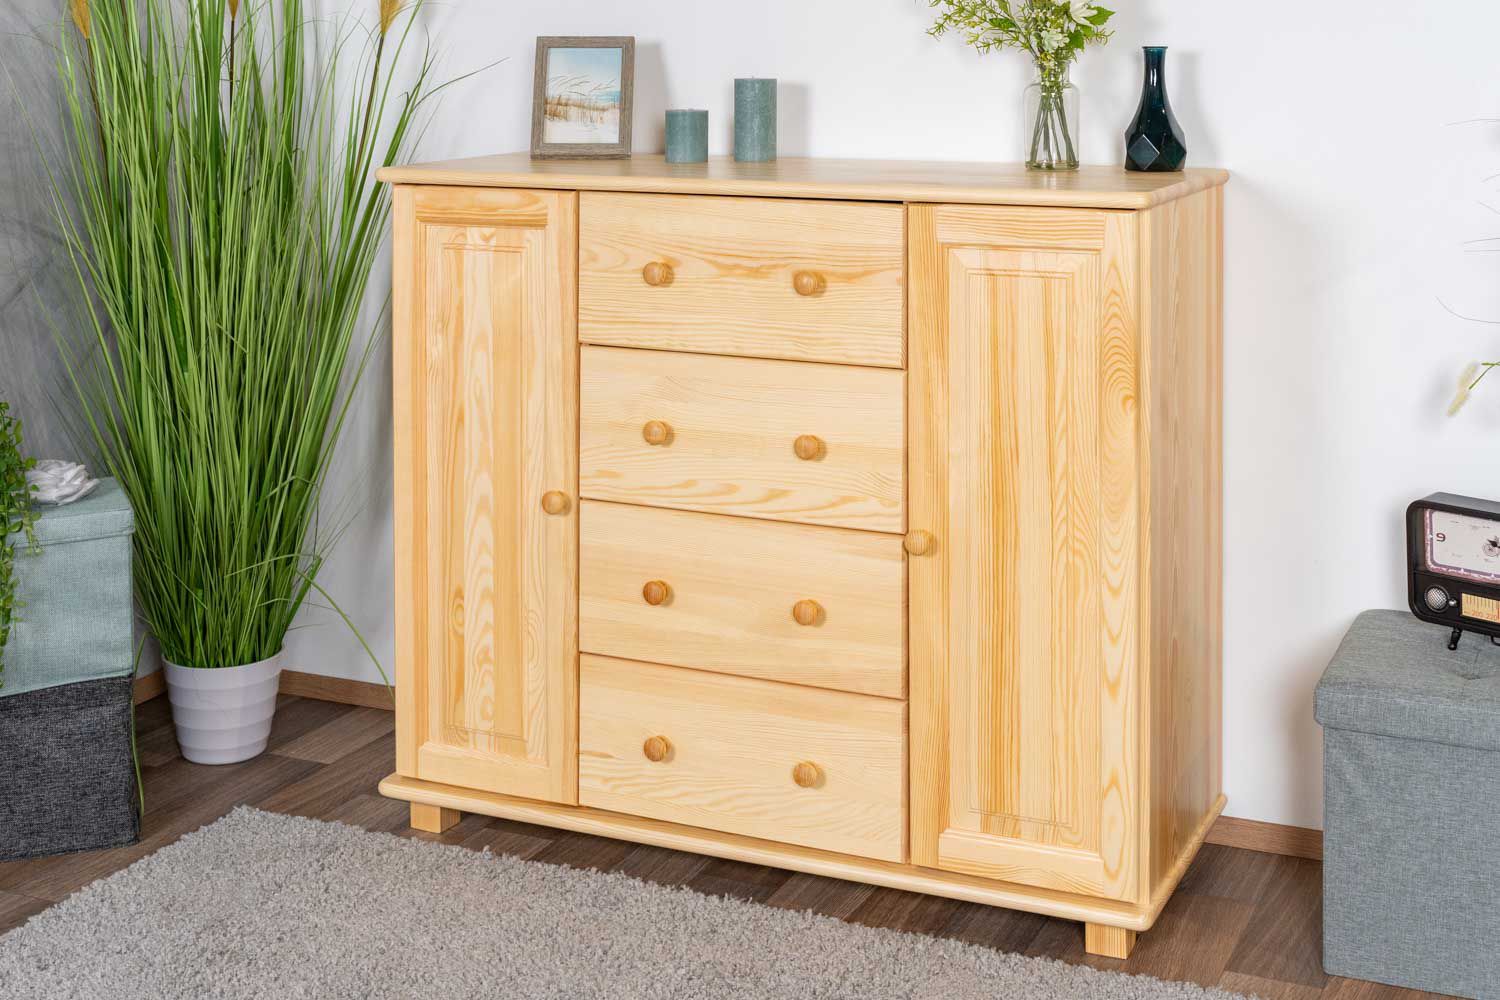 Chest of drawers solid pine solid wood natural 042 - Dimensions 100 x 118 x 47 cm (H x W x D)